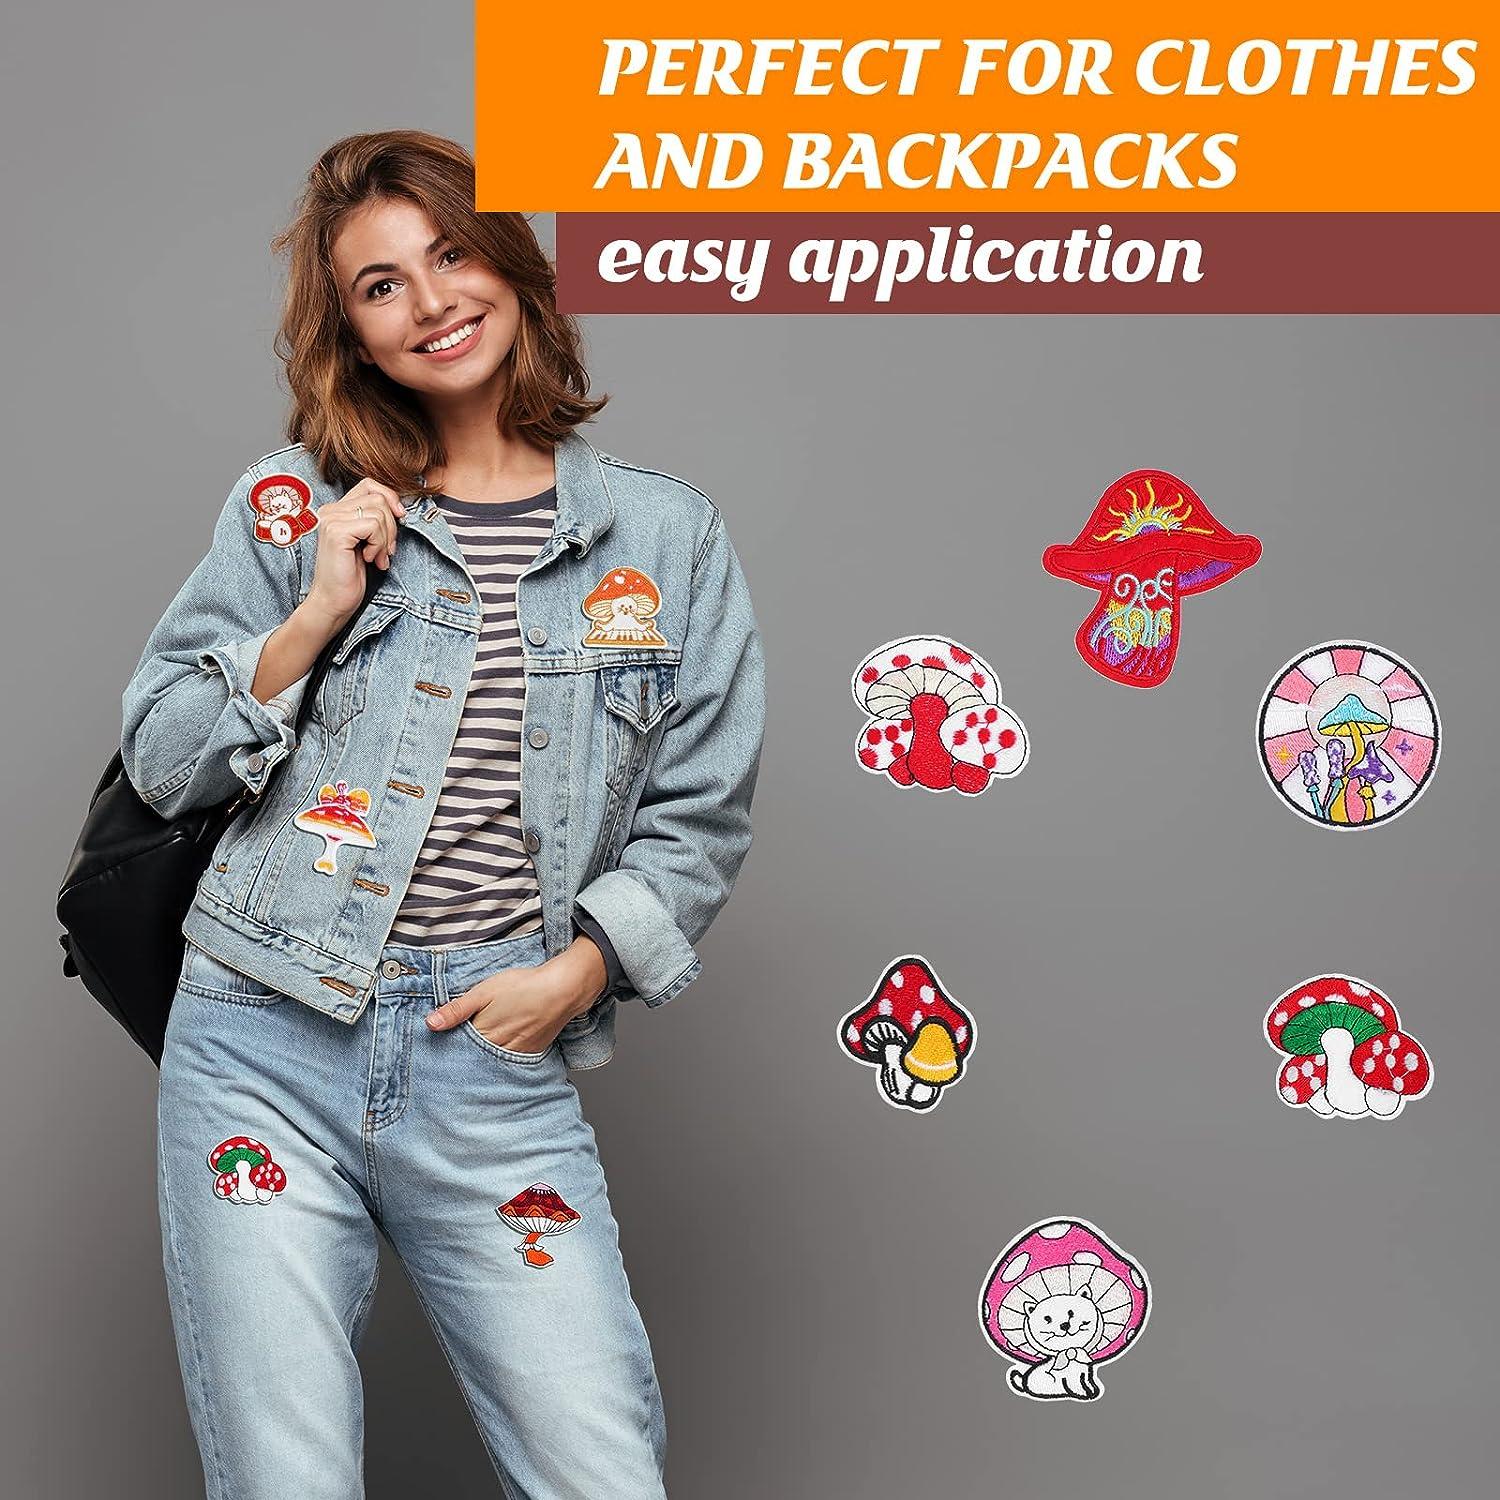 Iron on Patches for Clothing,14 Pieces Patches Embroidered Applique Patches, Sew on Iron on Patches Fabric Repair Patches for Clothes Jeans Jackets